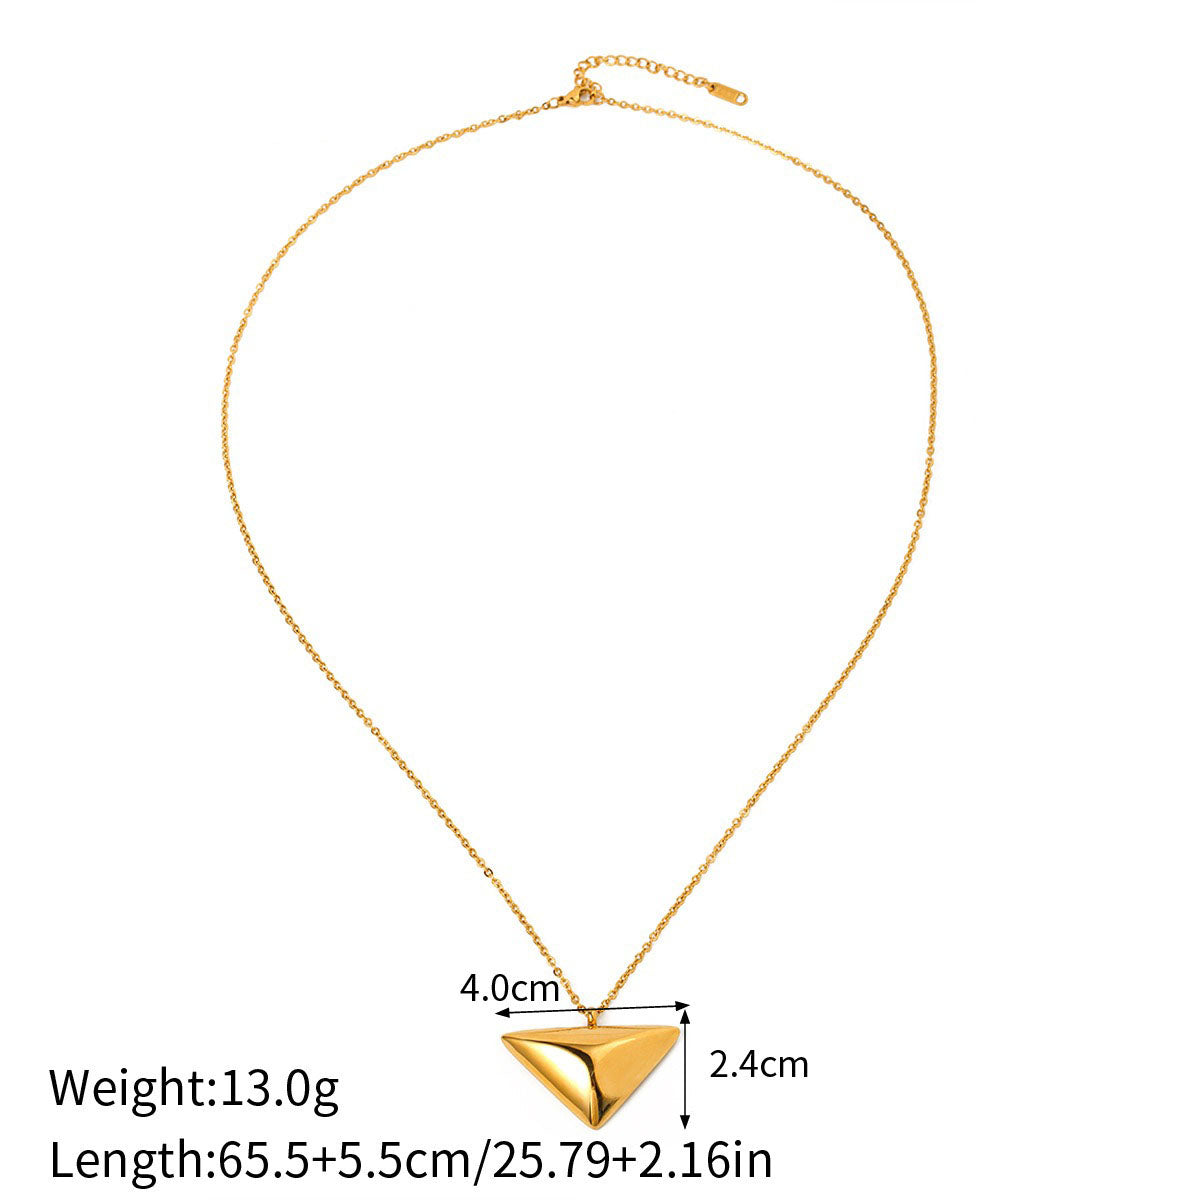 18k gold fashionable simple triangle pendant necklace